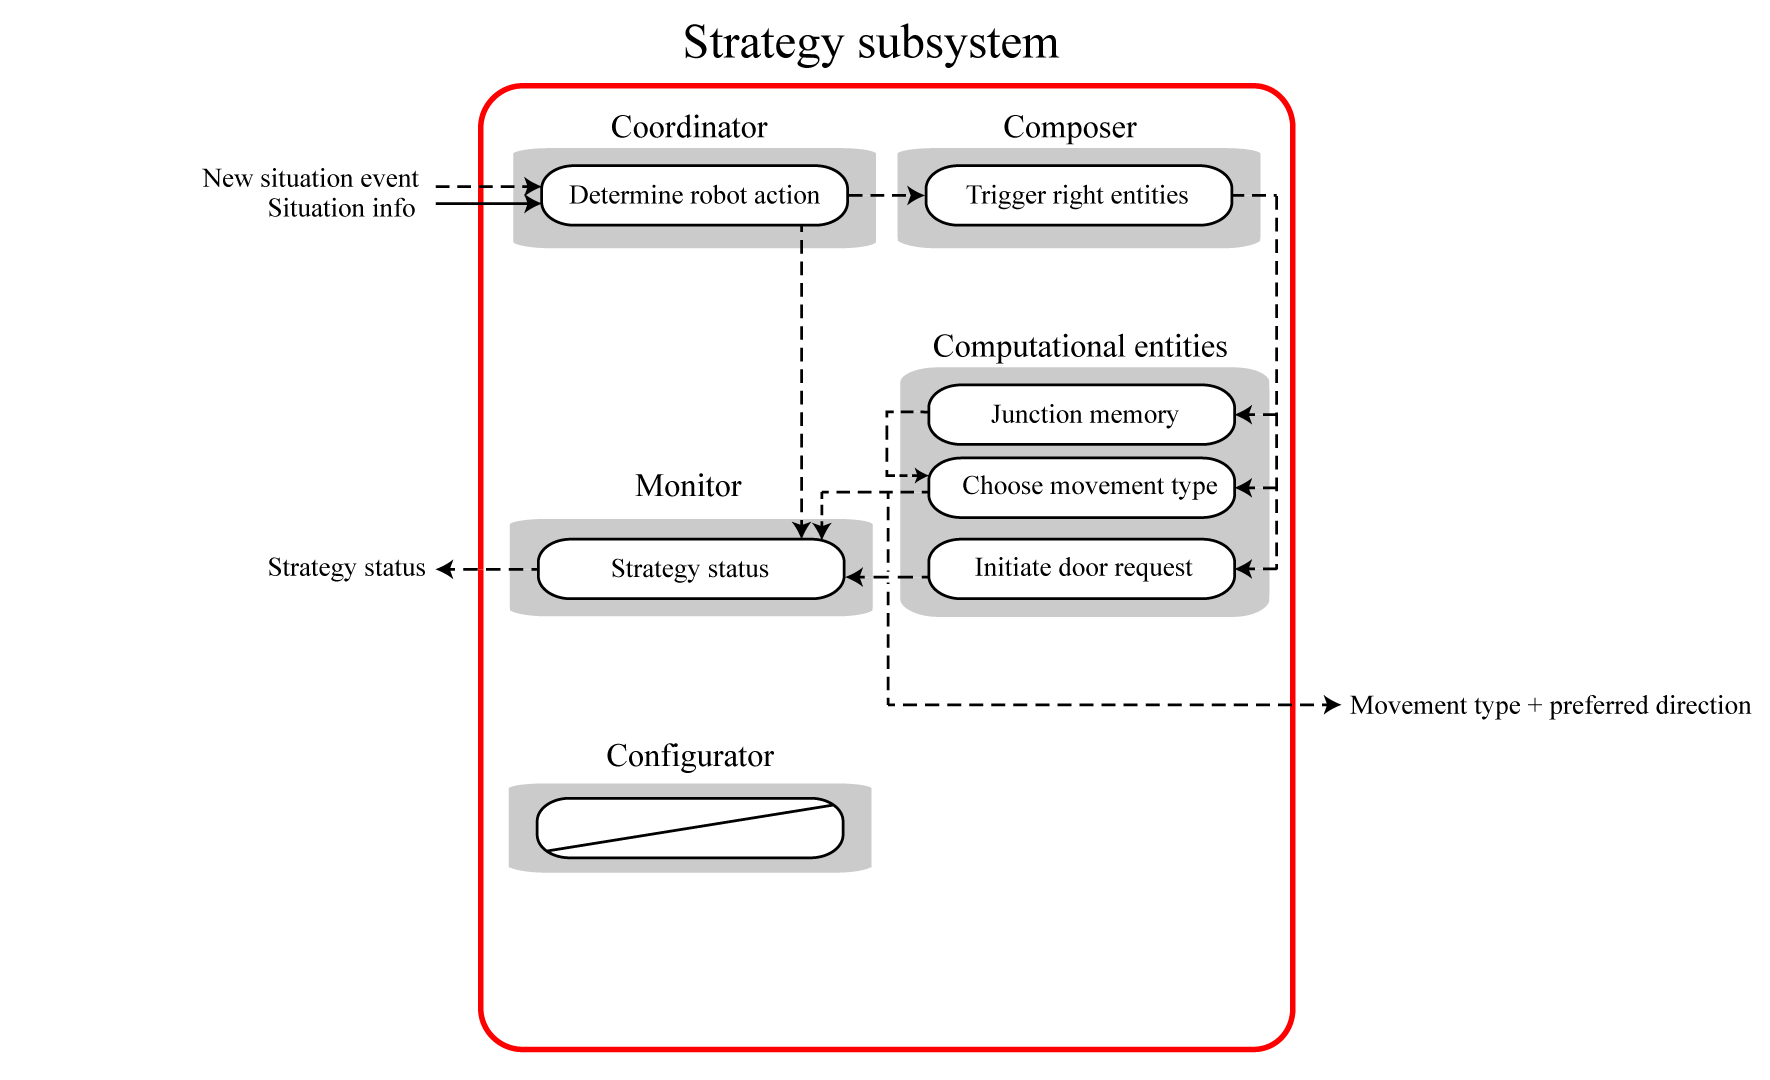 The strategy subsystem.